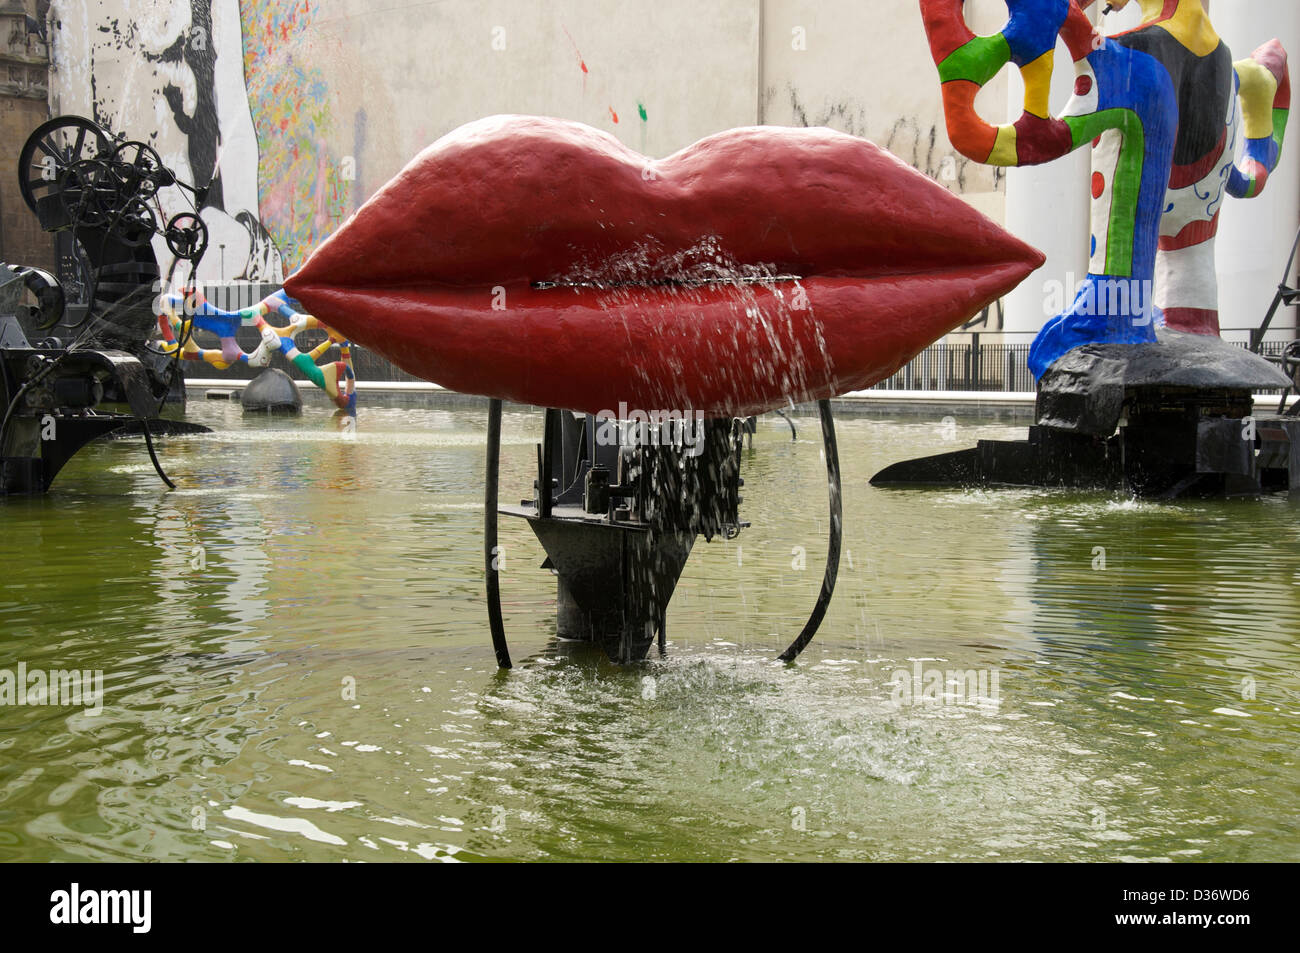 This huge pair of red lips called L’Amour by artists Jean Tinguely and Niki de Saint Phalle, is part of the Stravinsky fountain in Paris, France. Stock Photo